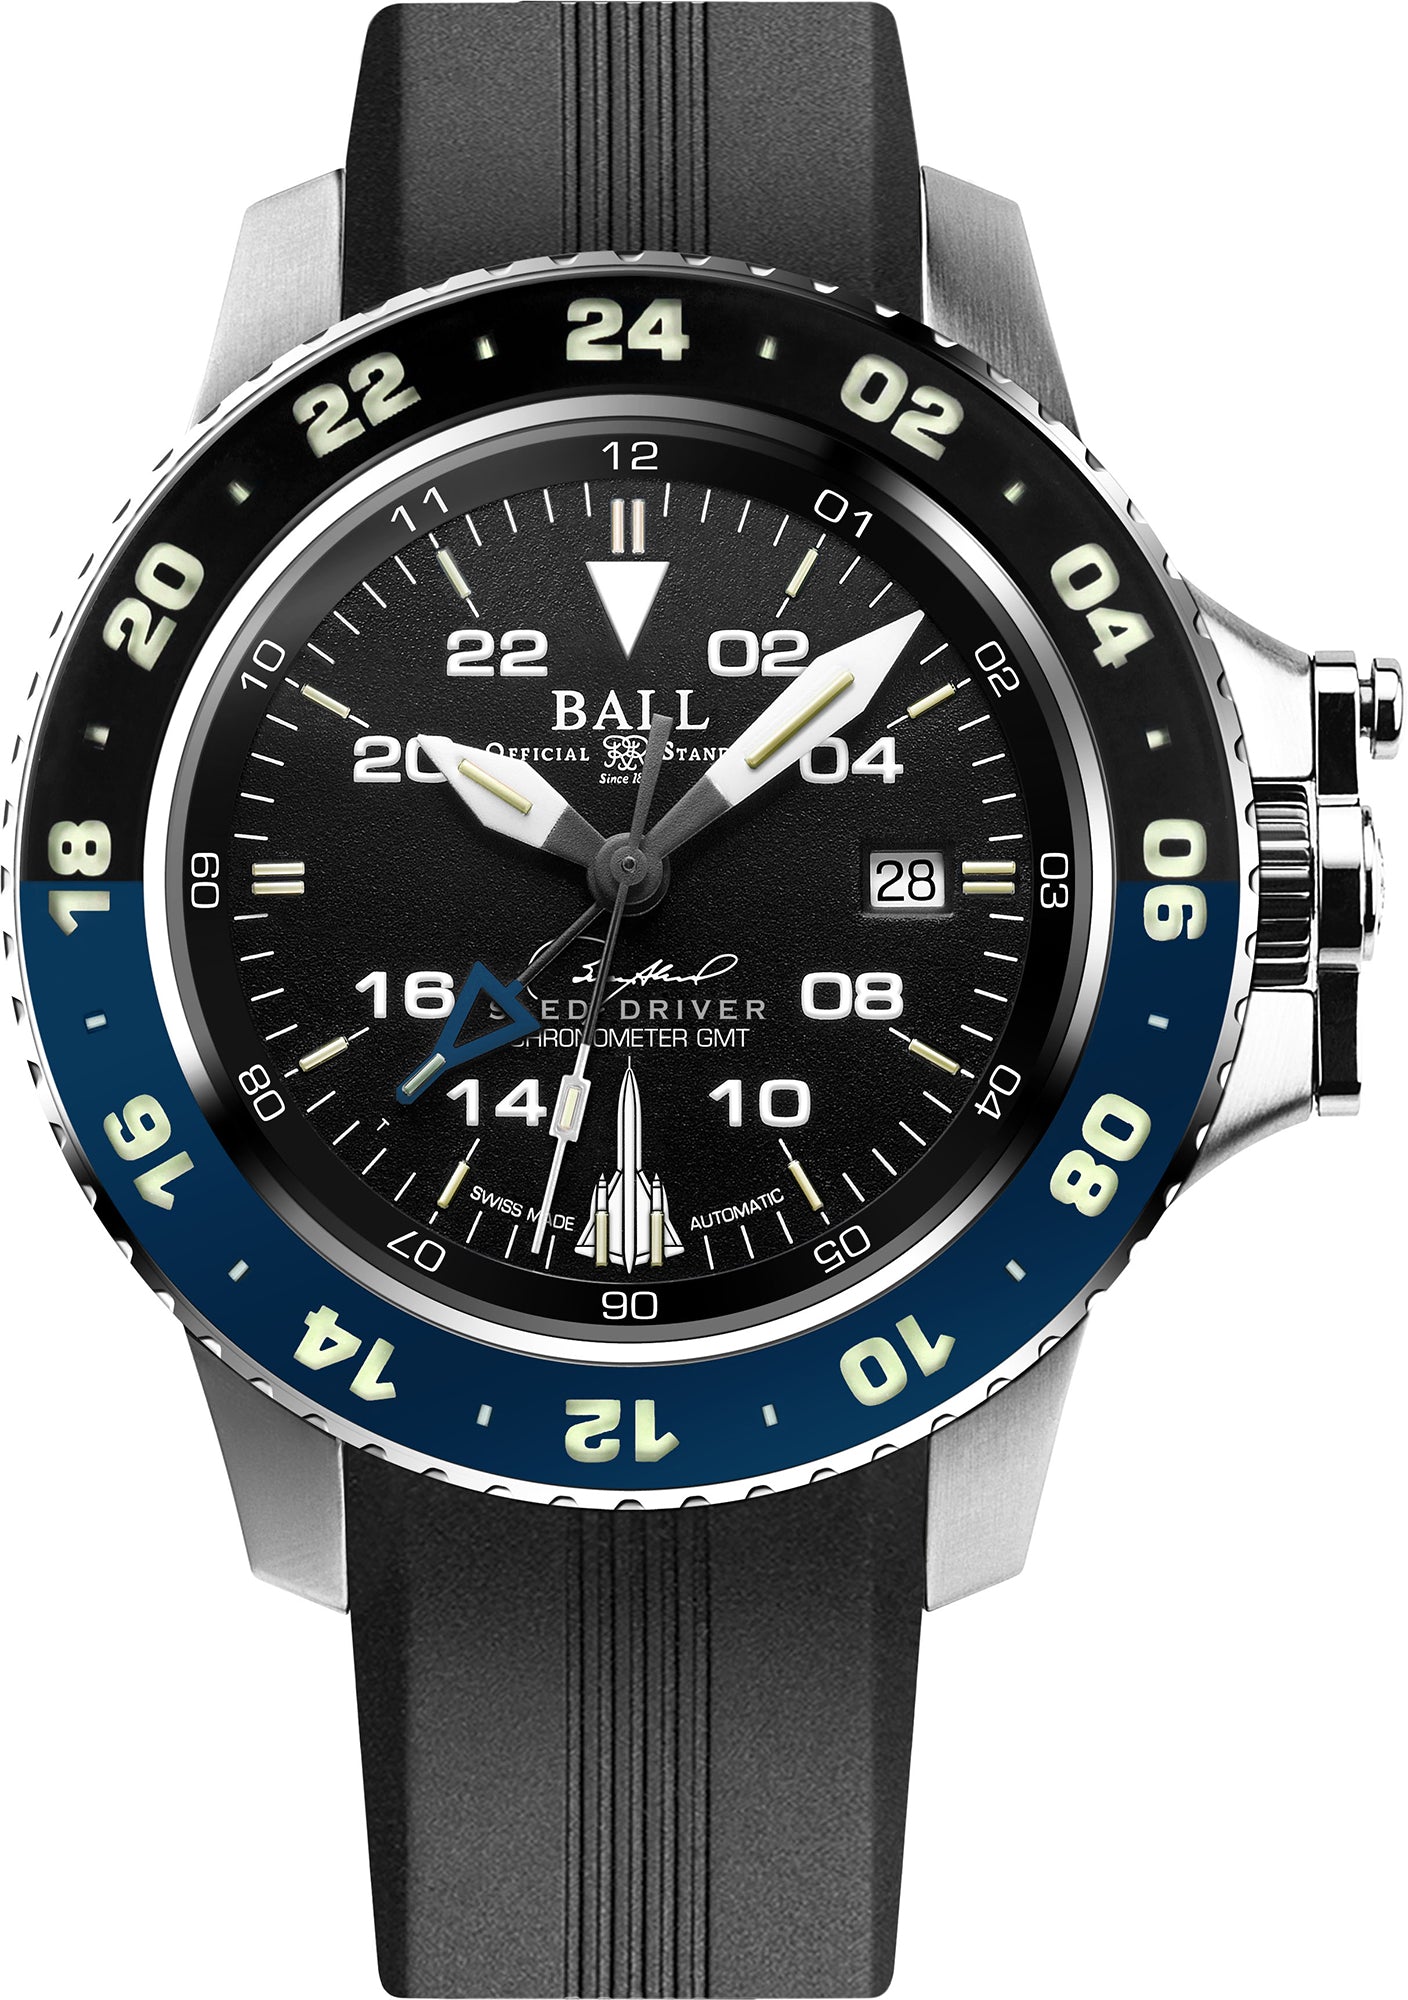 Ball Watch Company Engineer Hydrocarbon Aerogmt Sled Driver Limited Edition